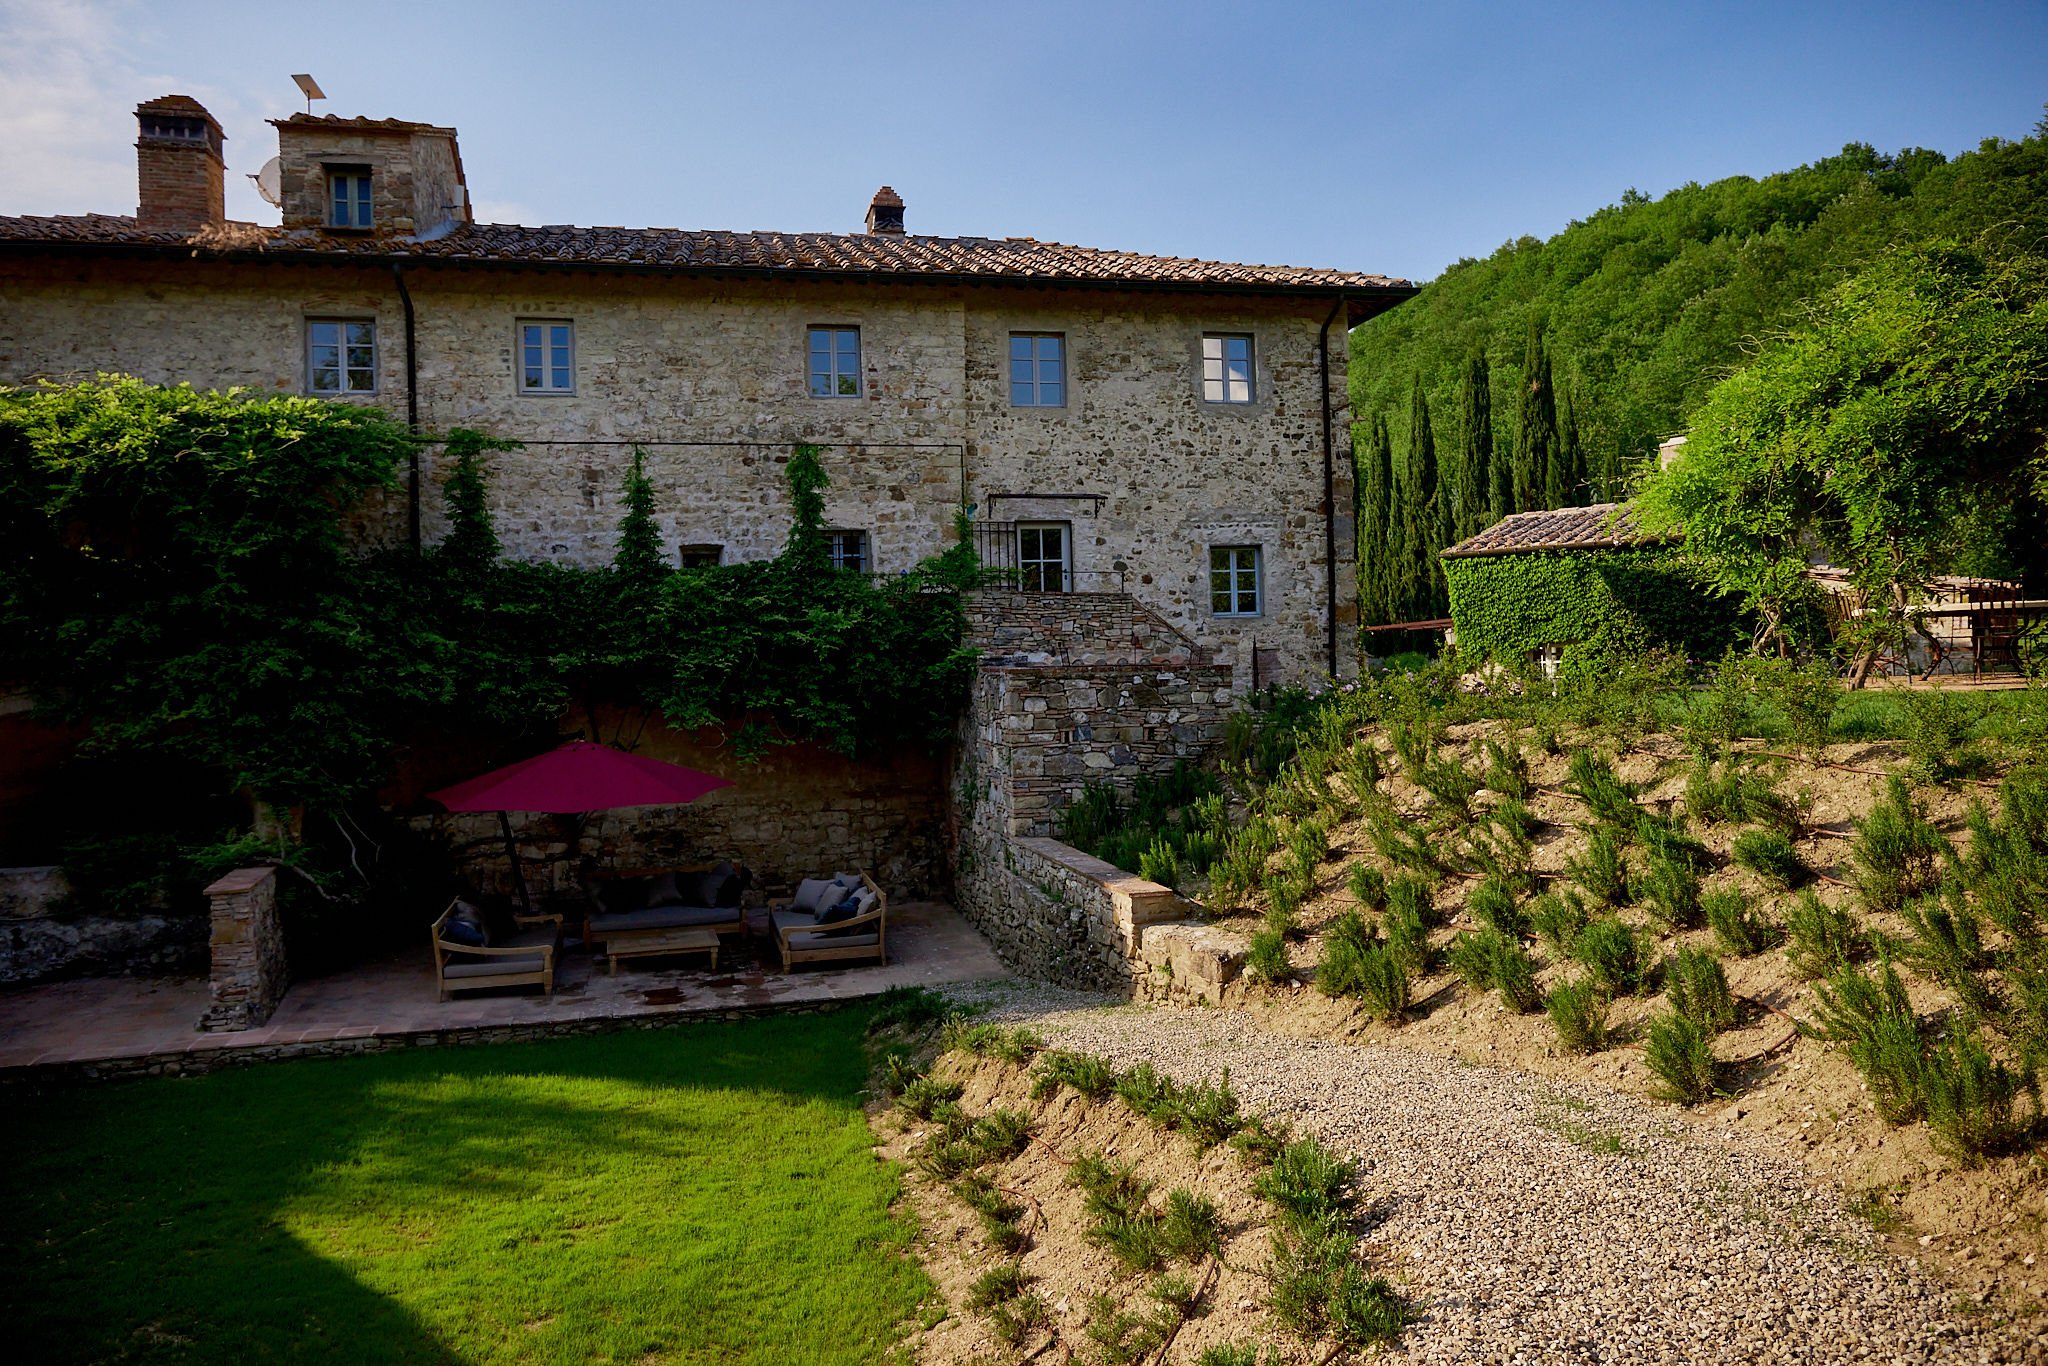 Francis York NEW Luxury Holiday Rental in the Chianti Hills, Tuscany Booking This Summer  39.jpg